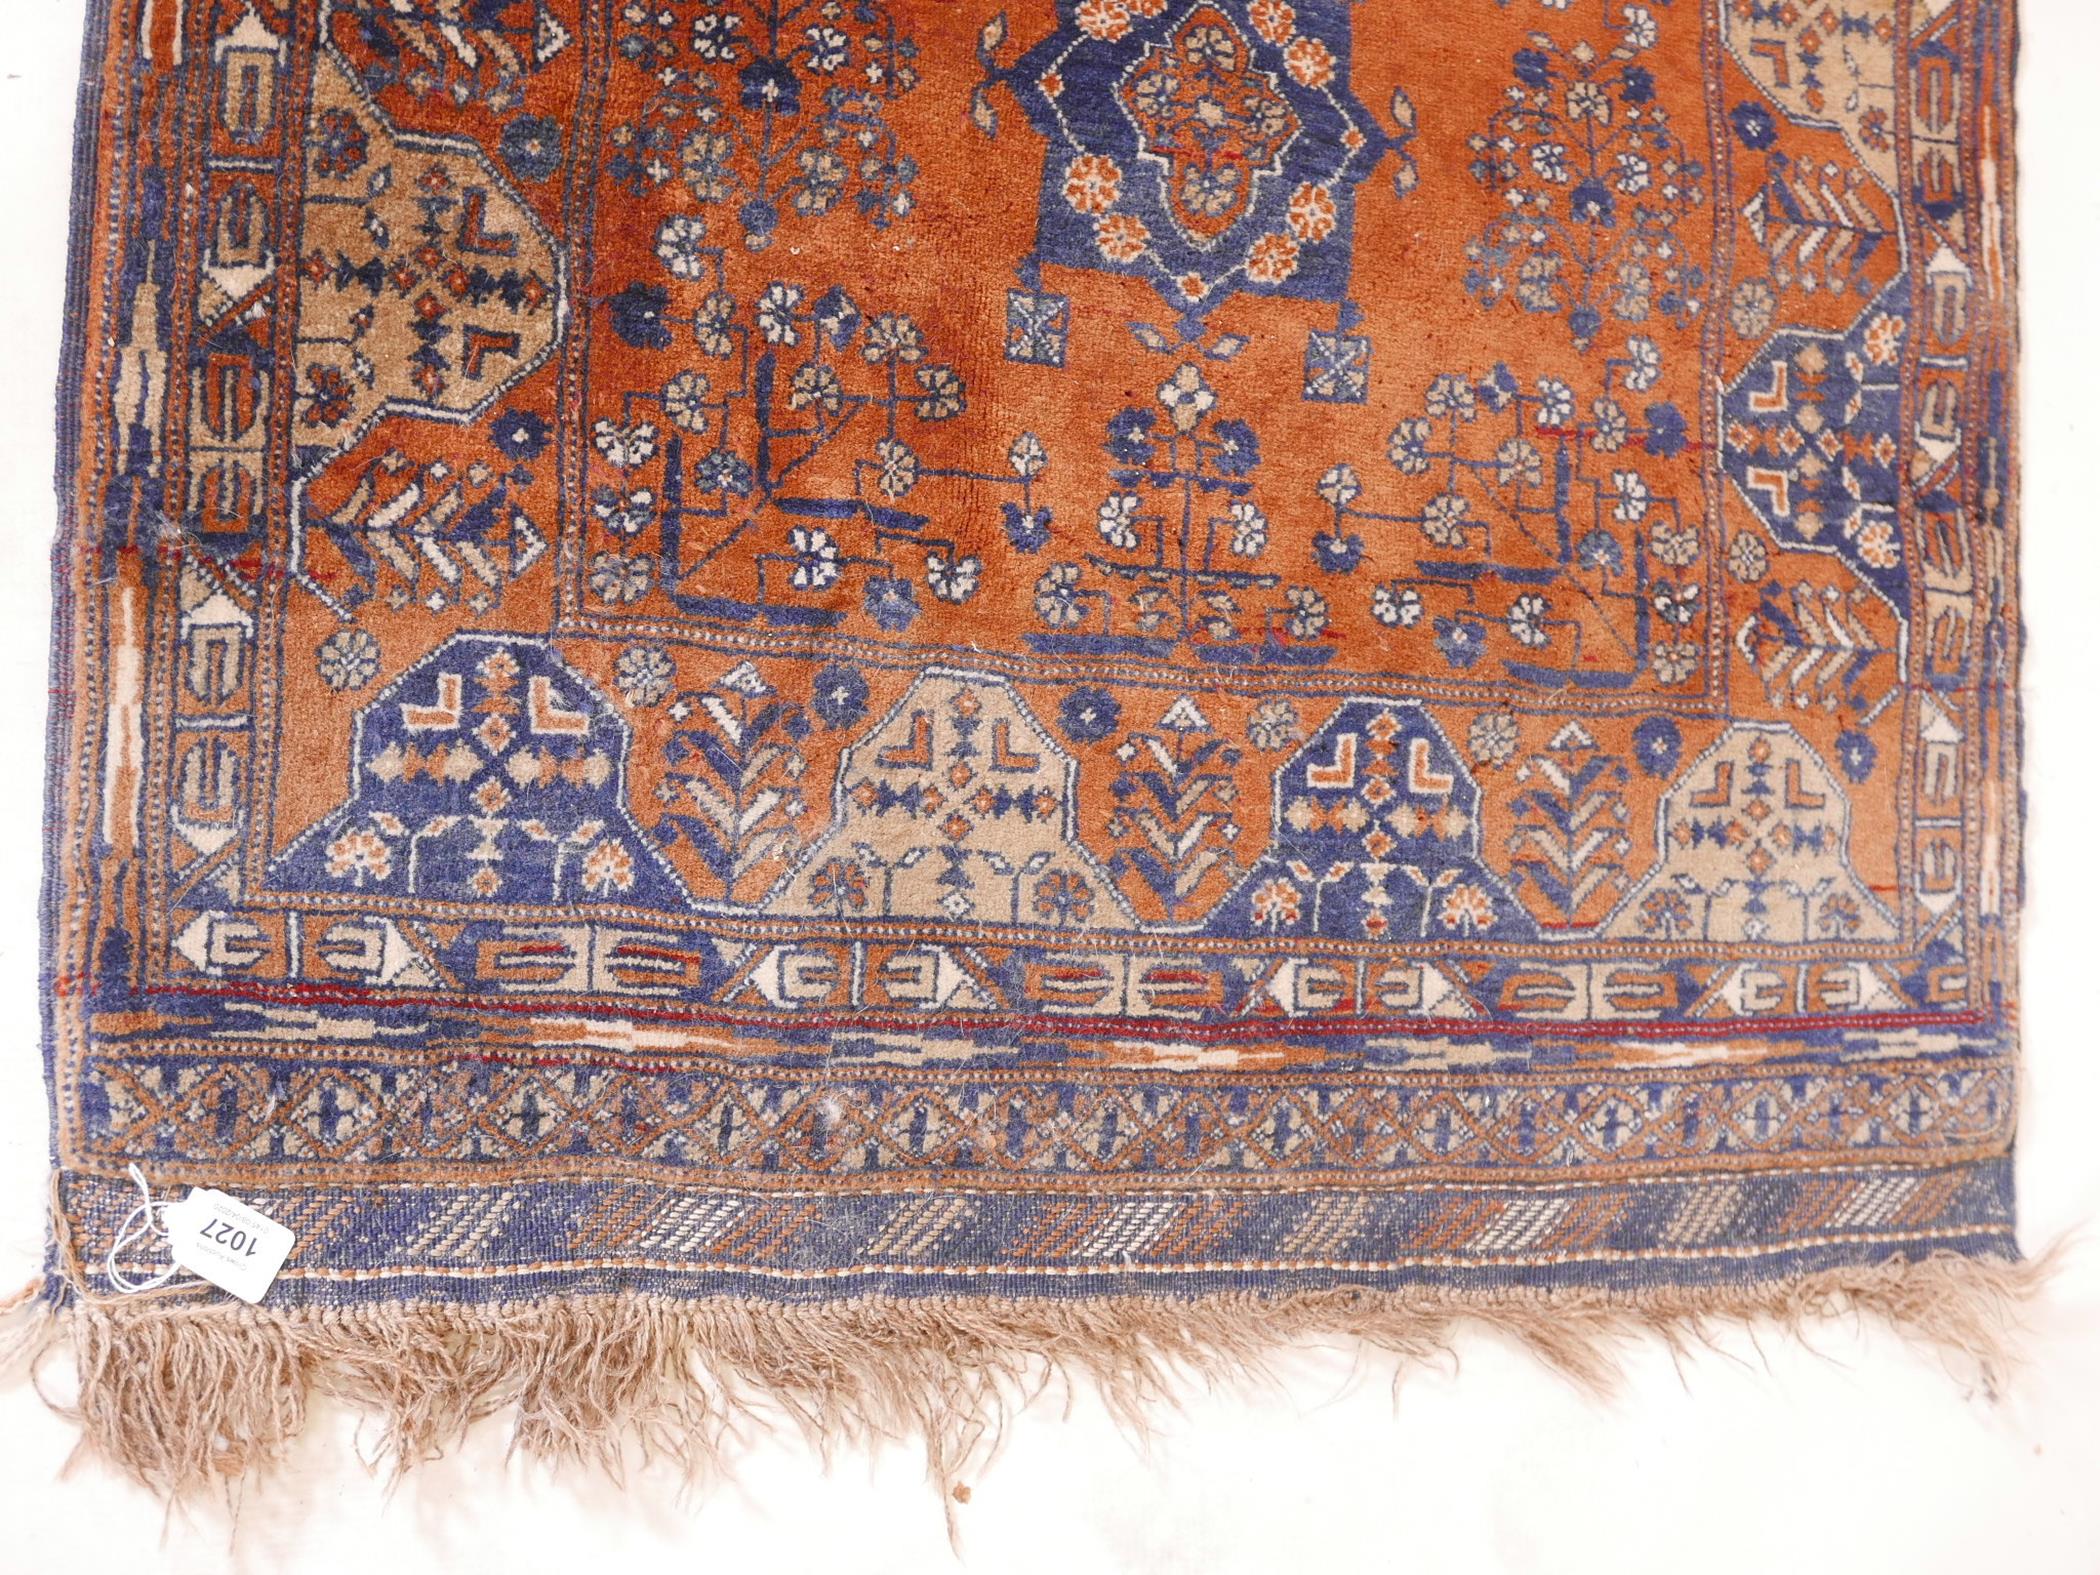 An Afghani wool rug with geometric patterns on a rust coloured field, 51" x 33" - Image 2 of 3